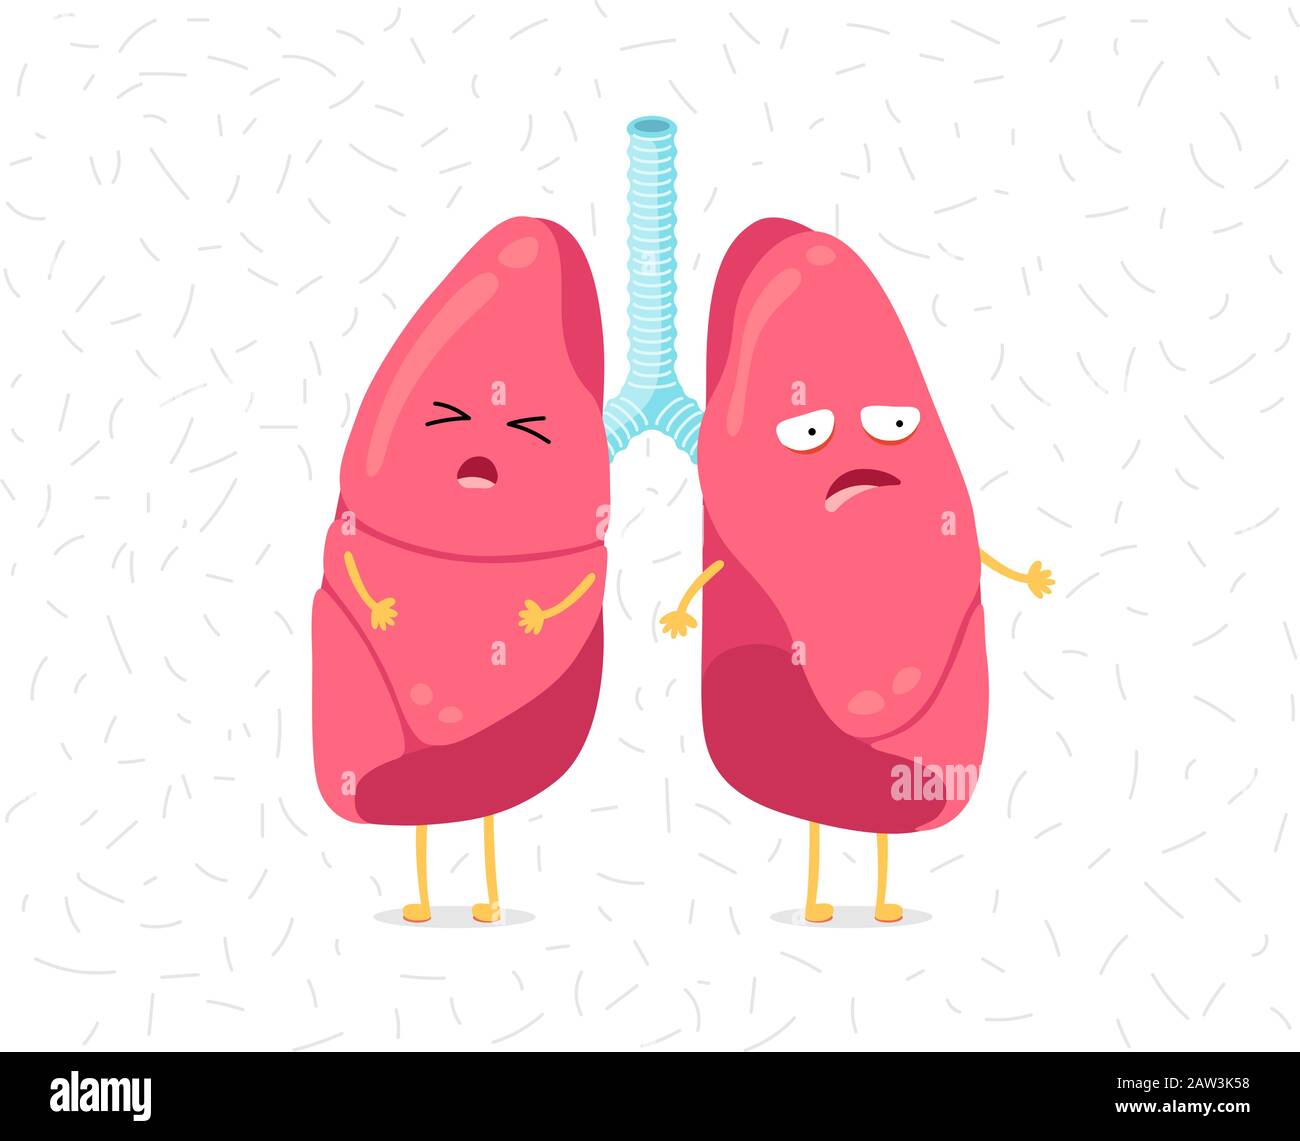 Cartoon lung character afraid dust or dangerous viral infections. Human internal organ prevents sick pneumonia tuberculosis airborne droplet. Medical warning disease protection vector eps illusrtation Stock Vector